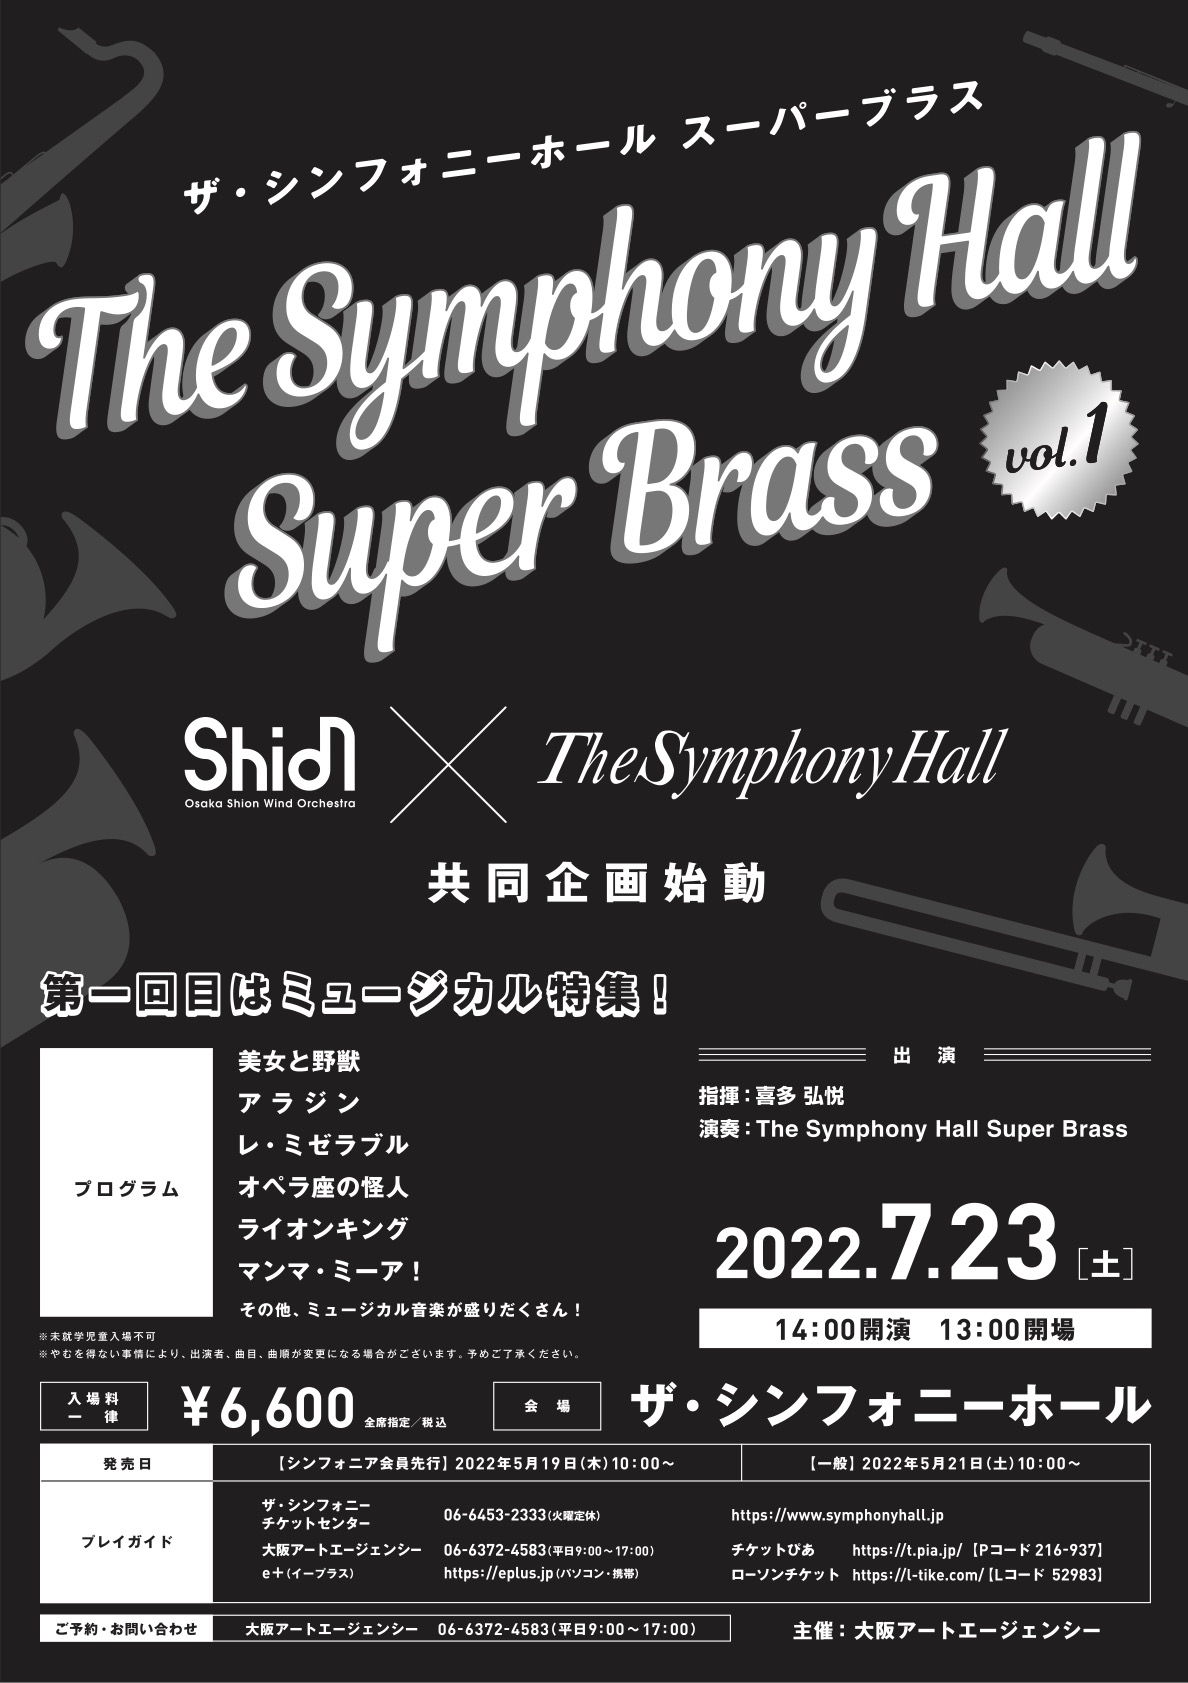 The Symphony Hall Super Brass Vol.1～cooperate with Osaka Shion 